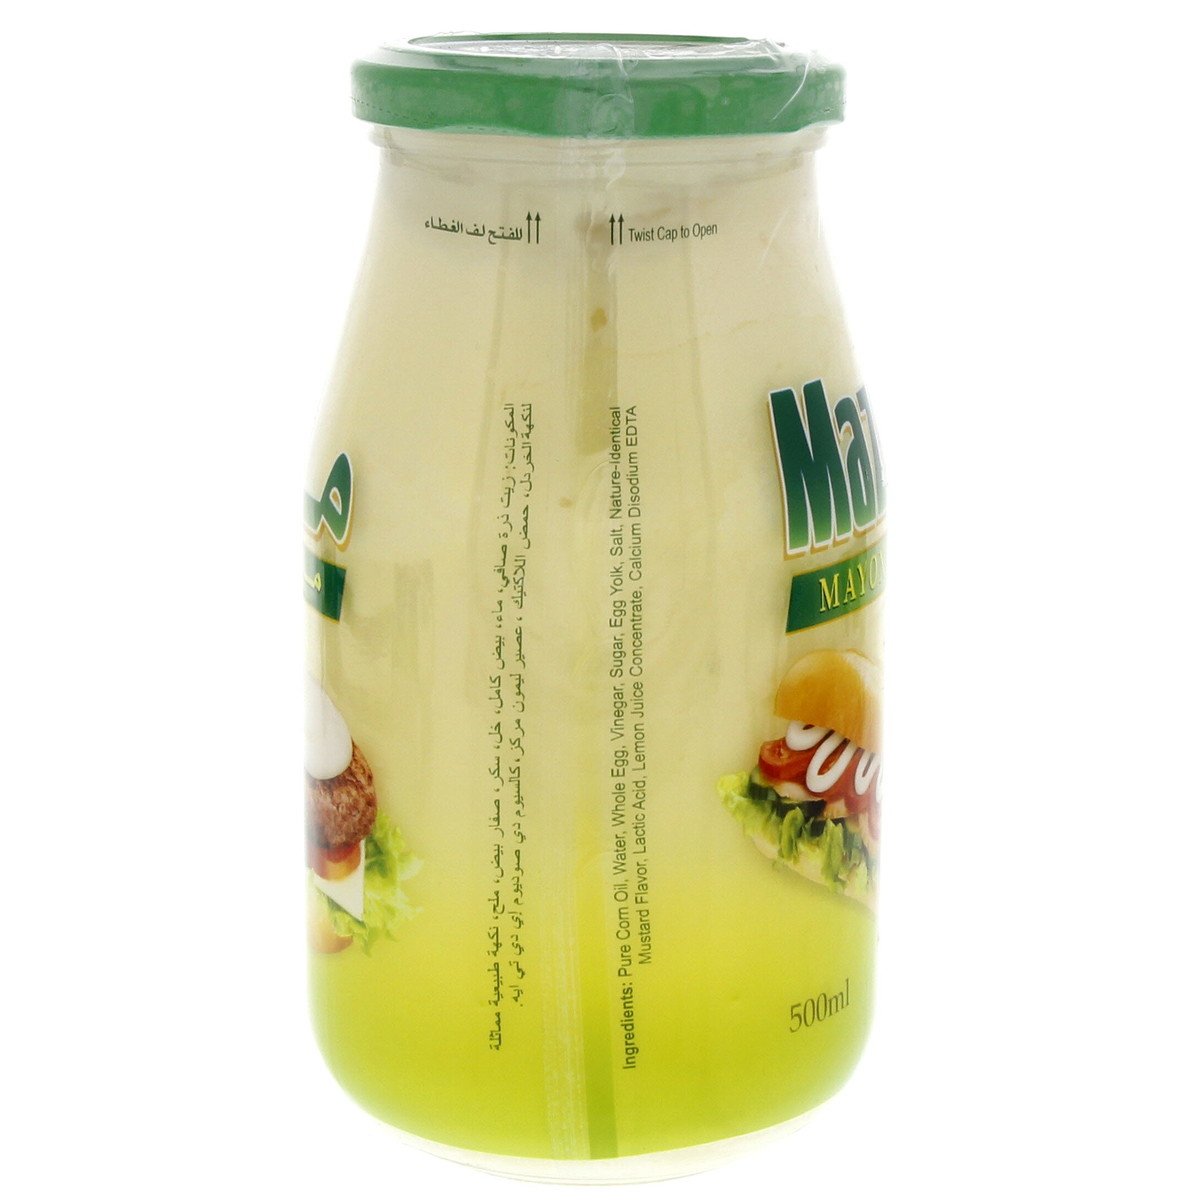 Mazola Mayonnaise Made With Pure Corn Oil 500ml